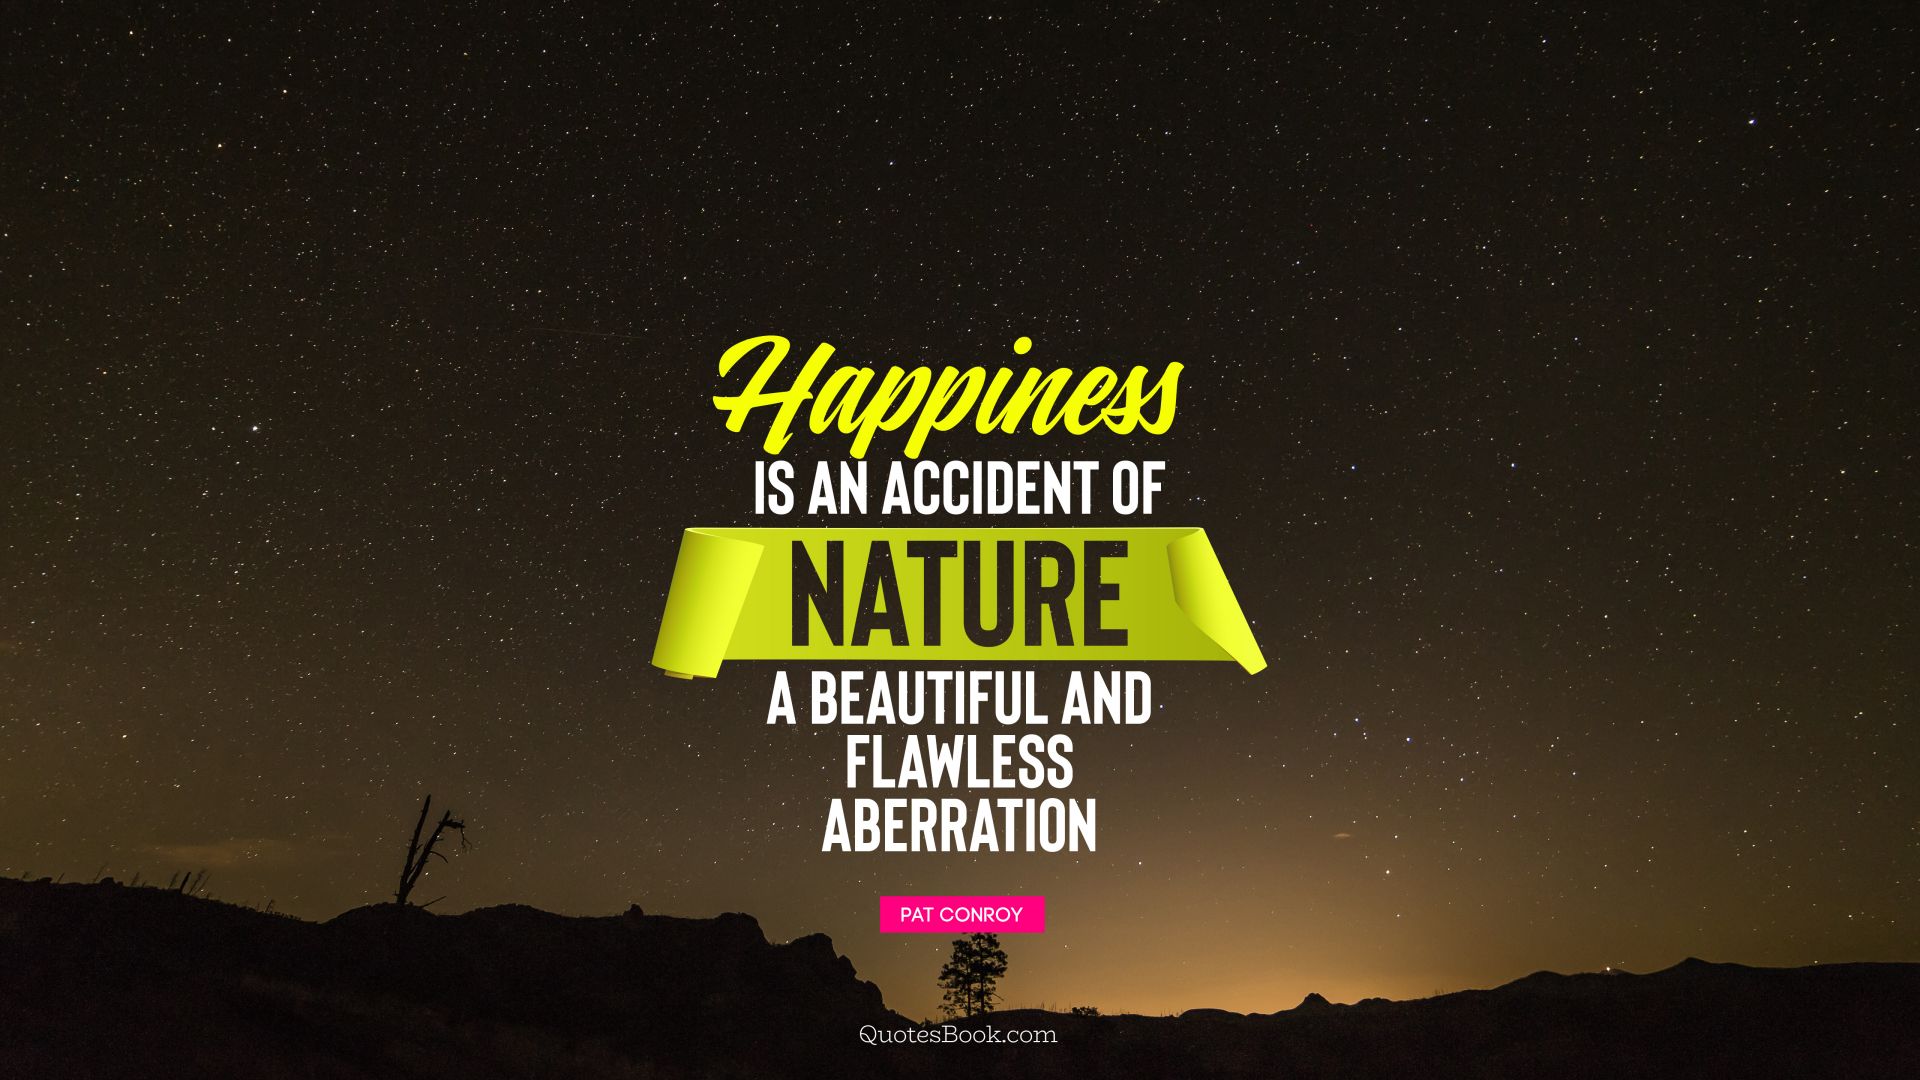 Happiness is an accident of nature, a beautiful and flawless aberration. - Quote by Pat Conroy